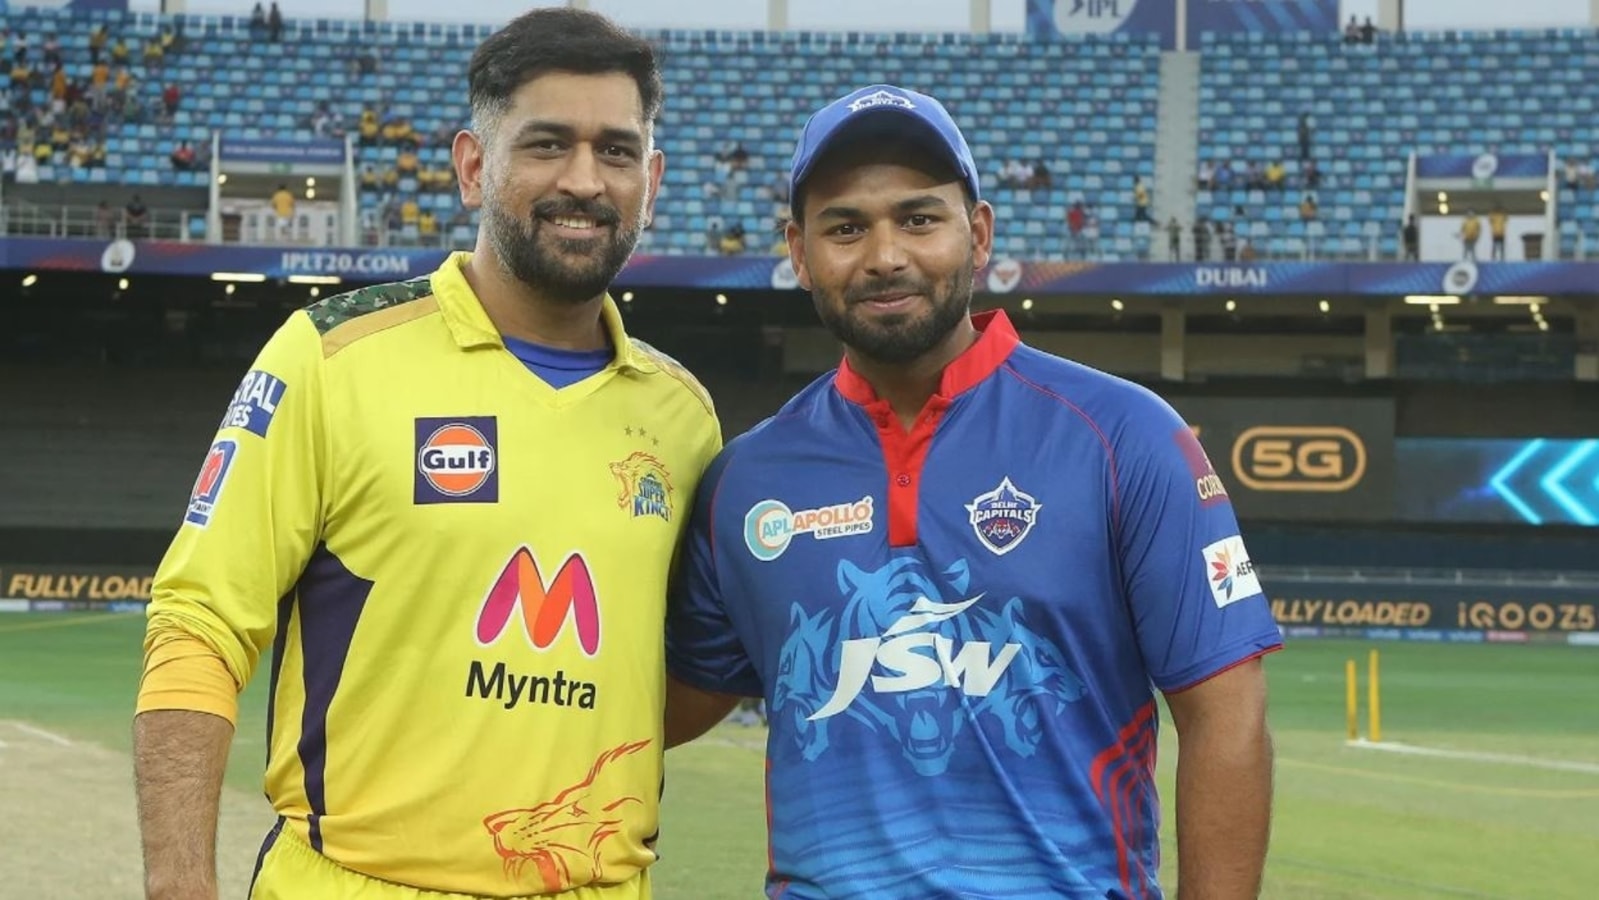 Right now, he's a rival': Rishabh Pant on MS Dhoni ahead of DC vs CSK clash in Dubai | Cricket - Hindustan Times